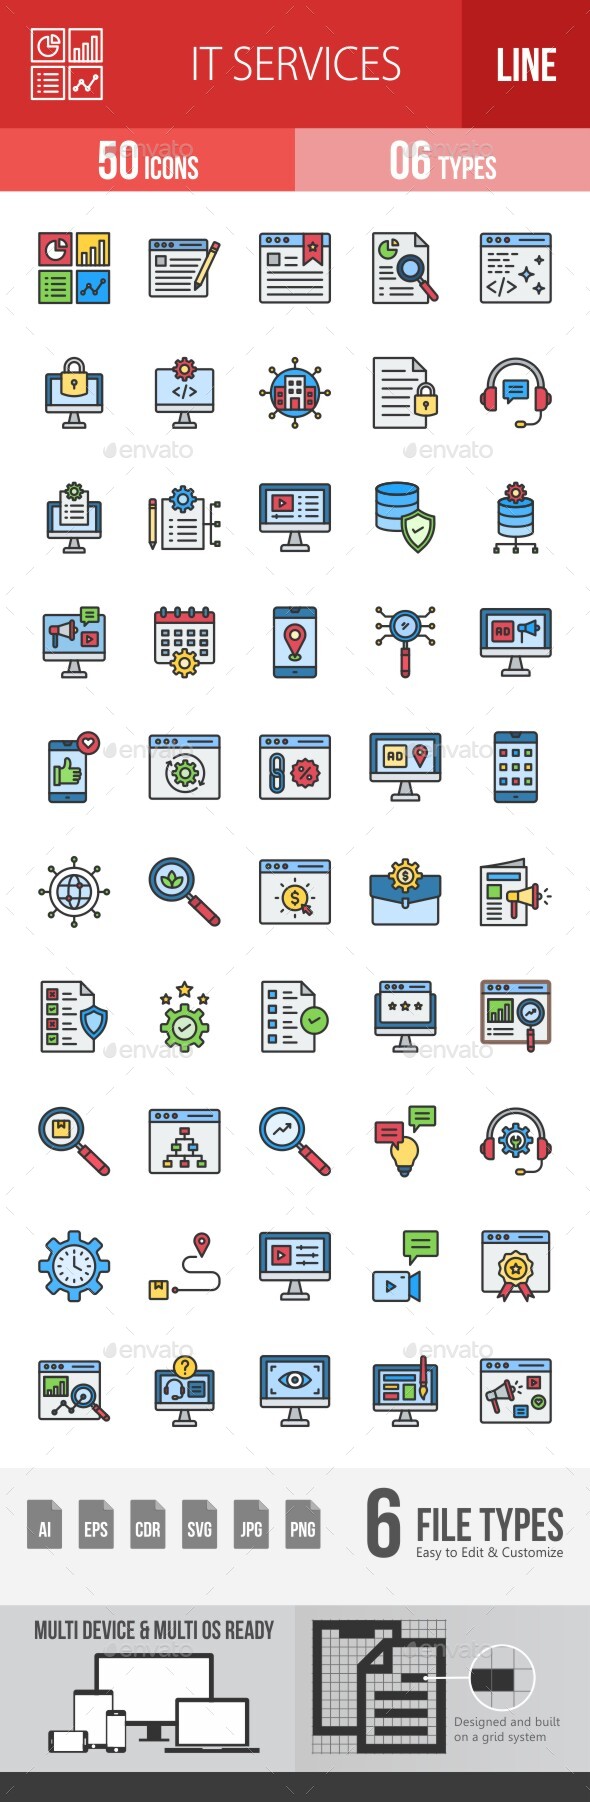 [DOWNLOAD]IT Services Filled Line Icons